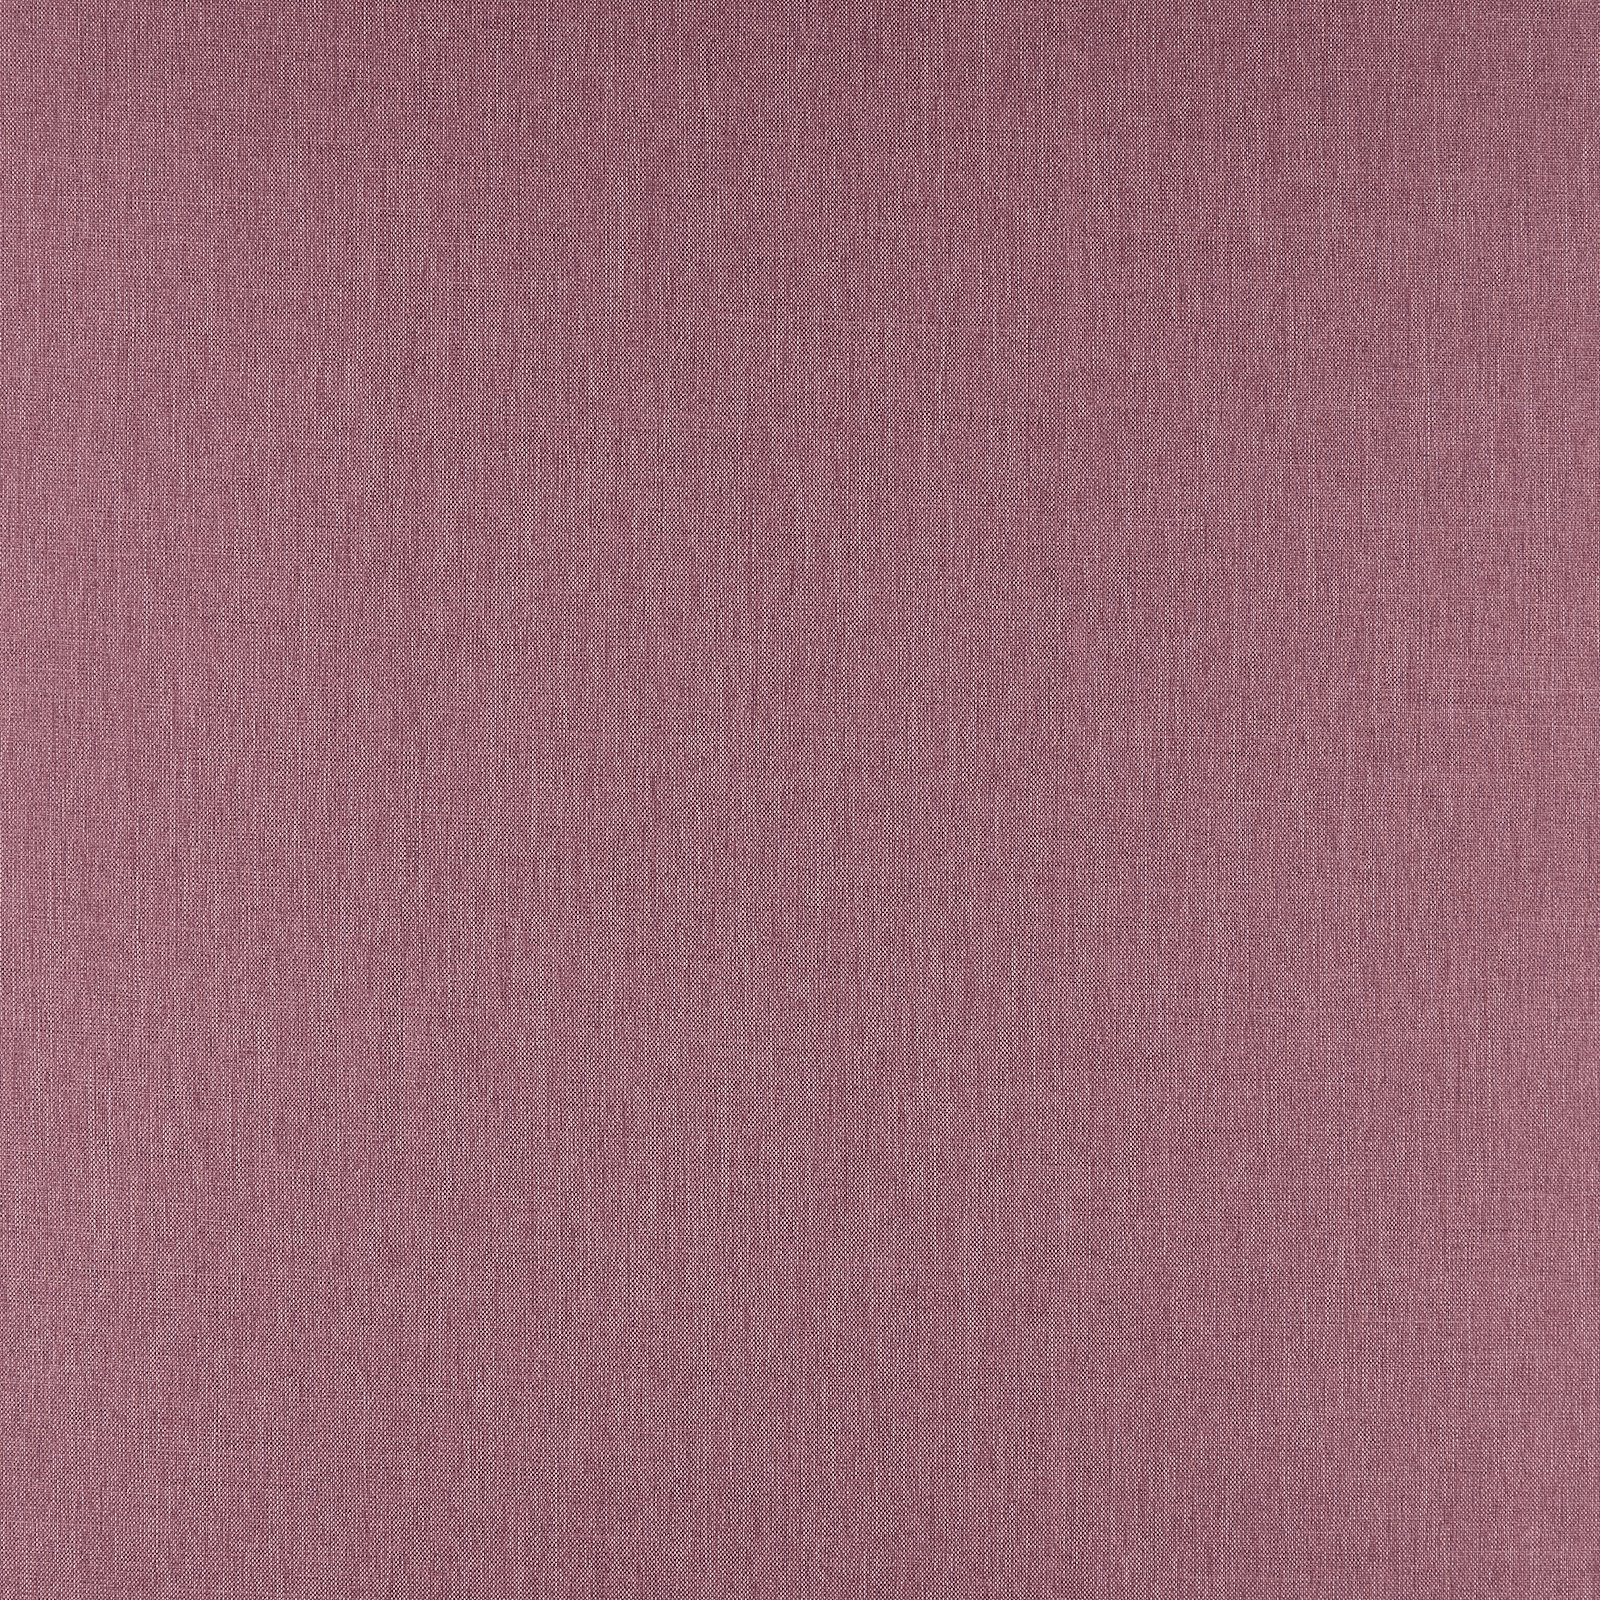 Upholstery fabric dark dusty violet mel 826590_pack_solid